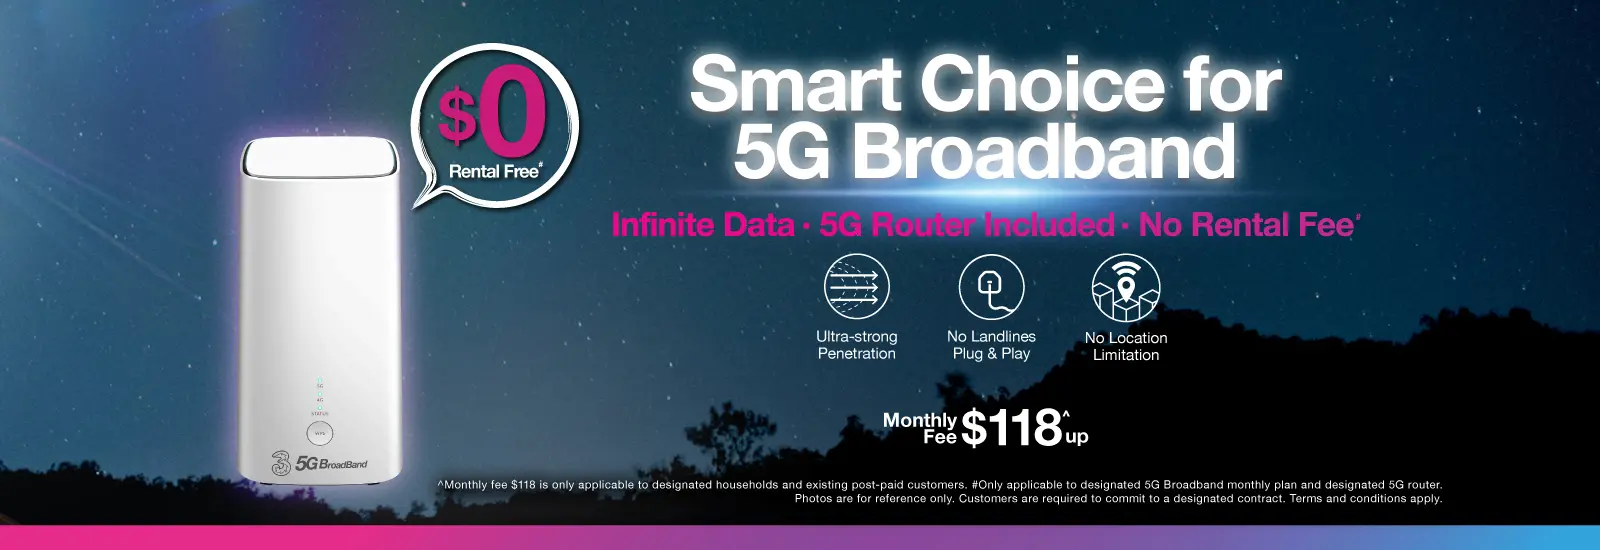 5G Broadband limited offer exclusively for Public Housing Estates and Home Ownership Scheme households! Get Infinite 5G Broadband data with Selected 5G Wi-Fi 6 Router for a monthly fee of $88!